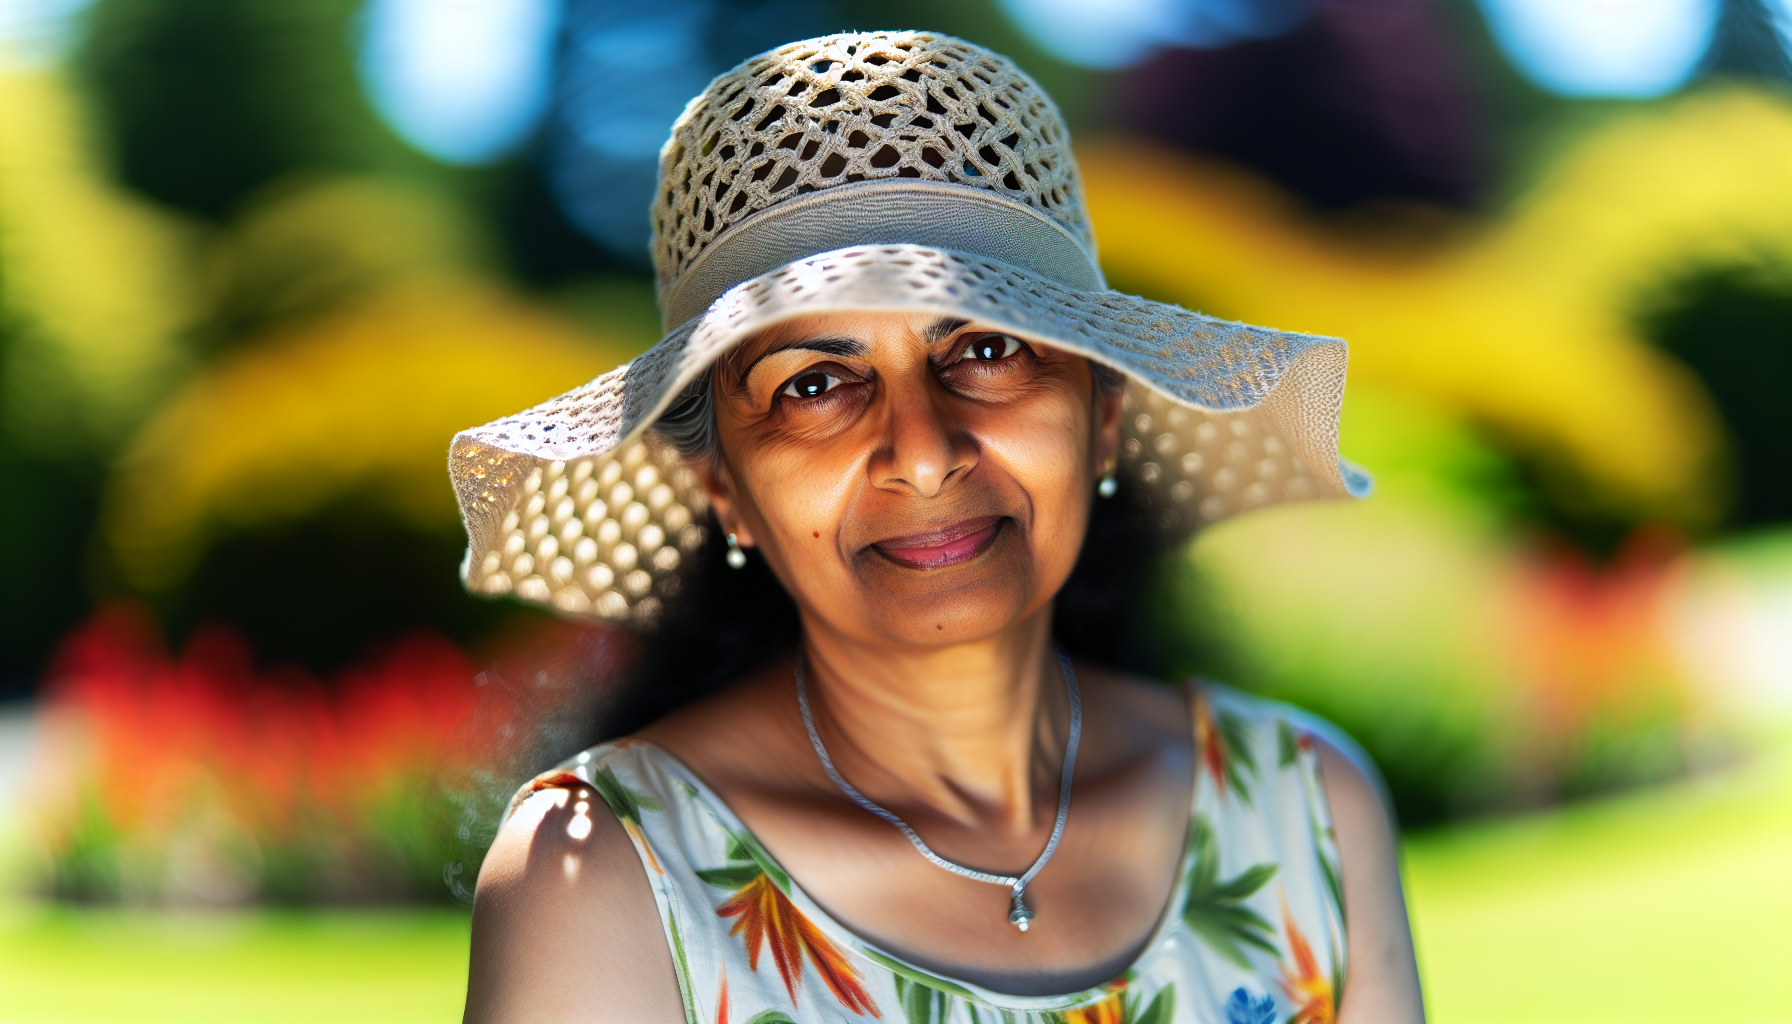 A woman wearing a lightweight and breathable sun hat